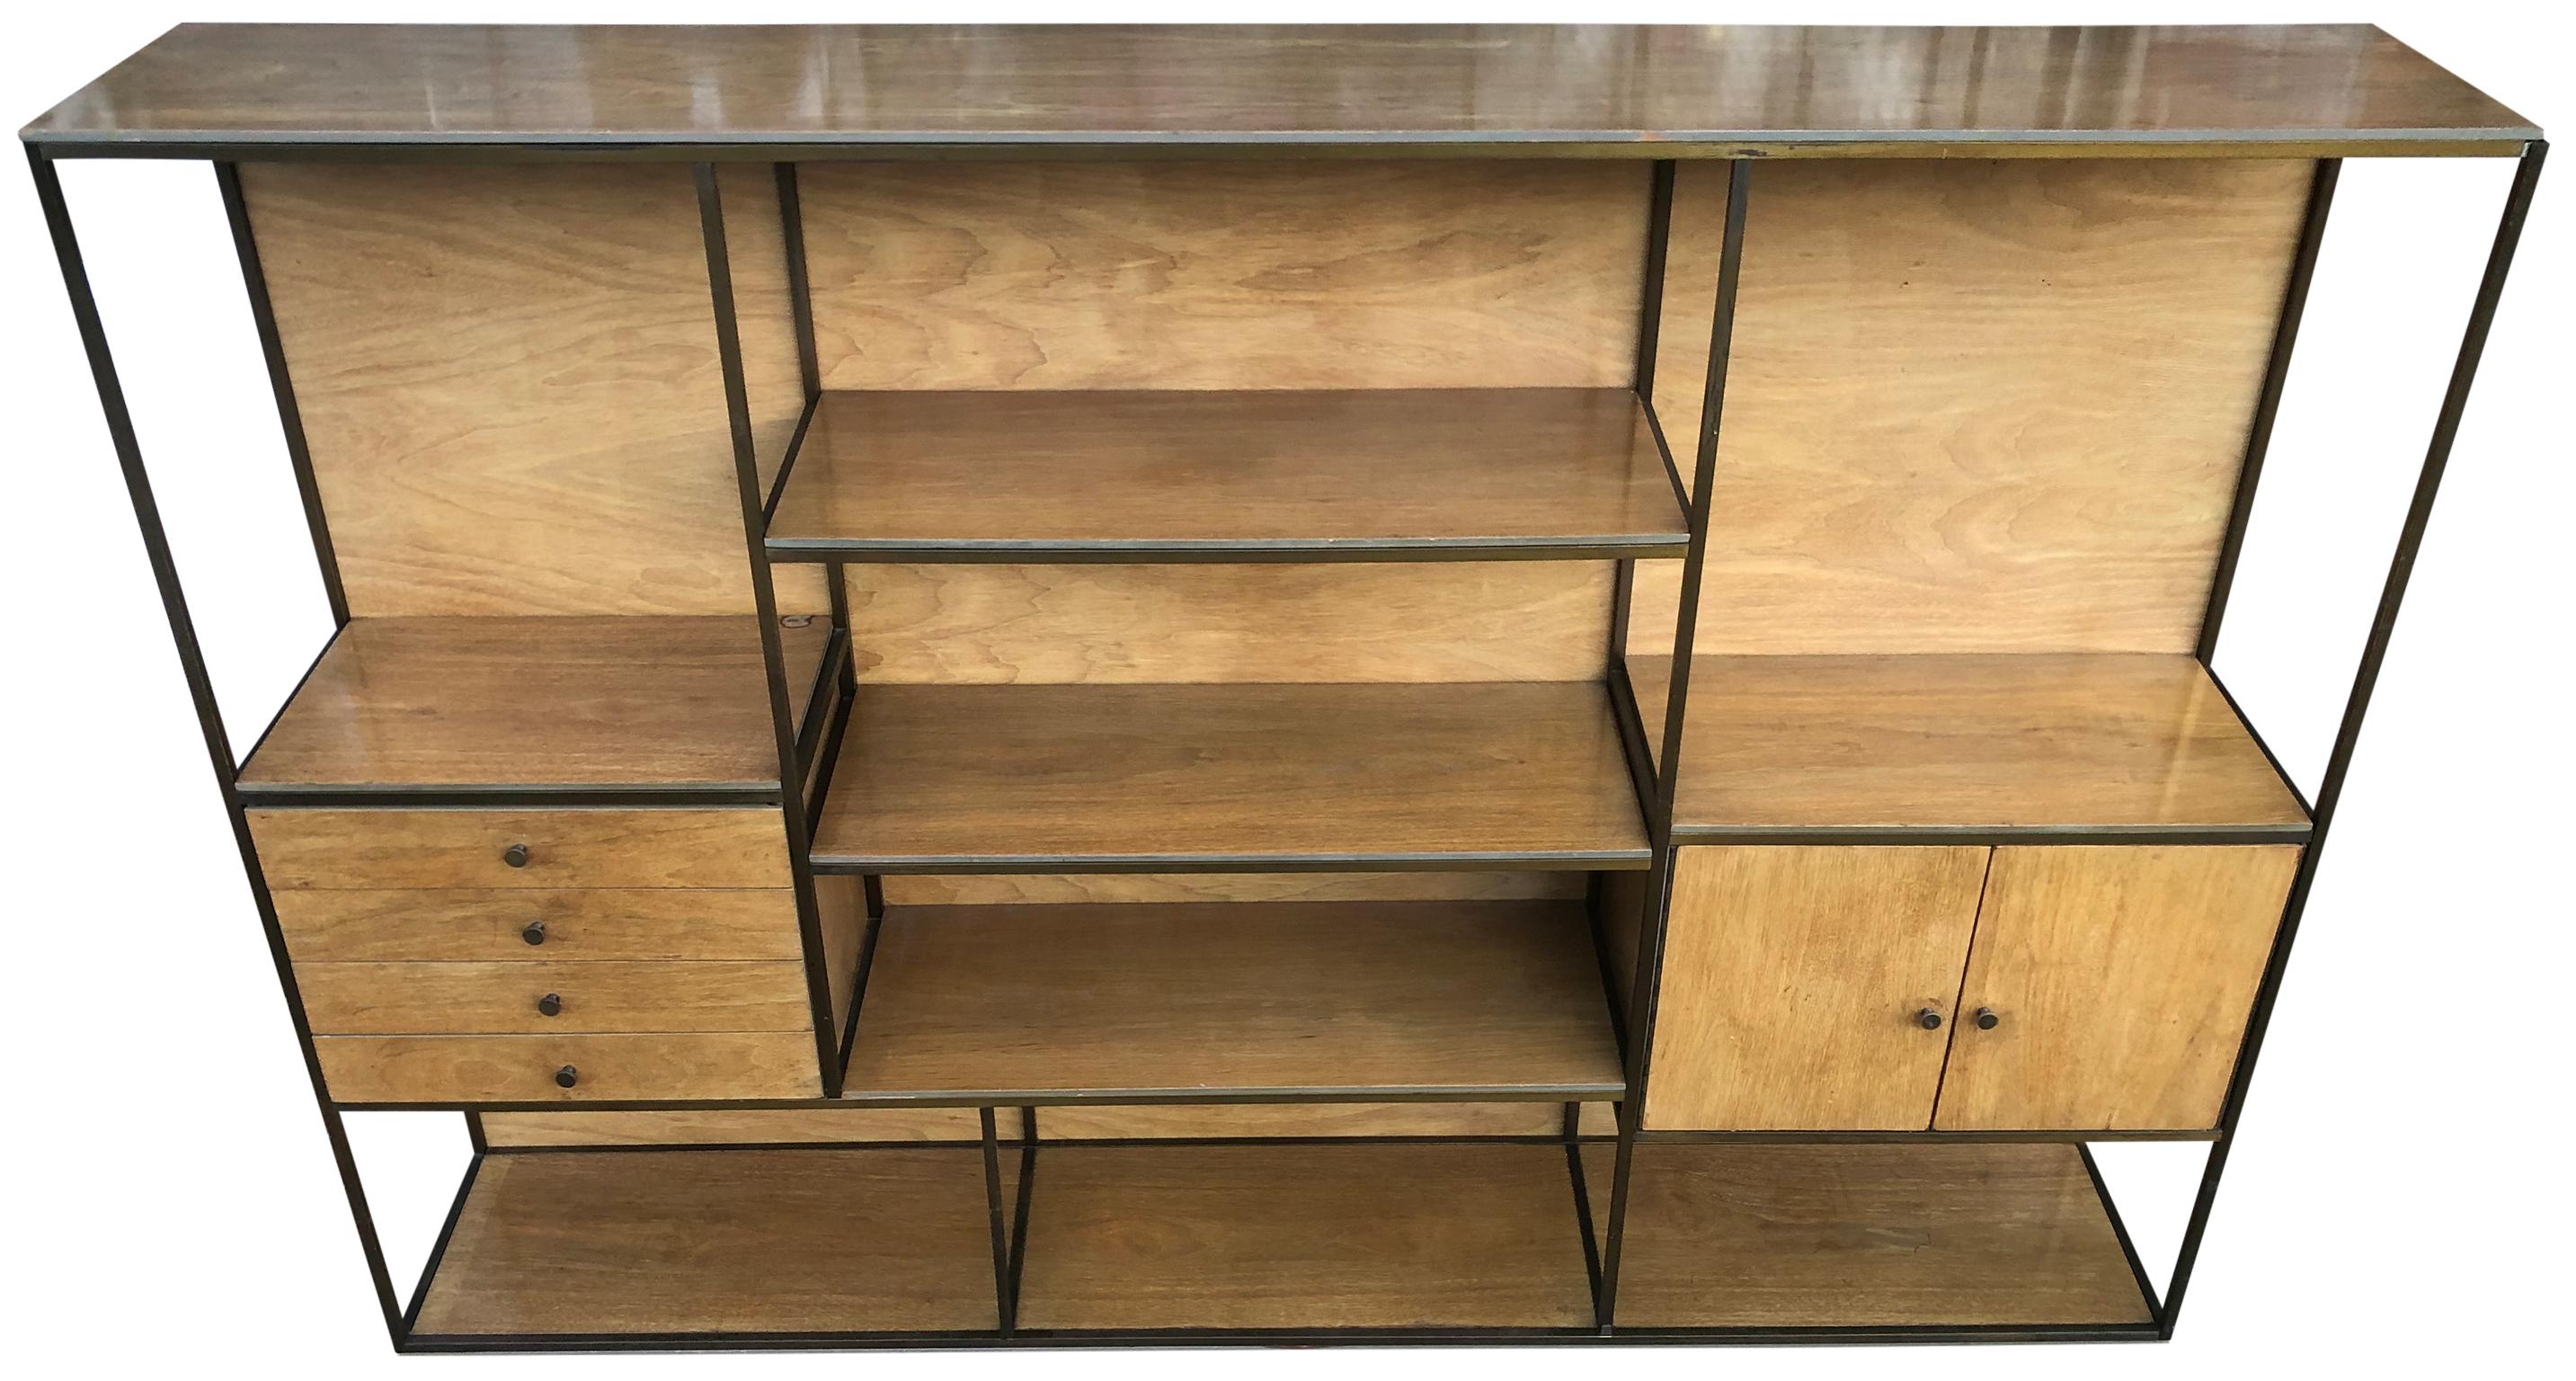 Paul McCobb style midcentury low brass bookcase shelf unit room divider with shelves, drawers and cabinet. Furnette Manufacturer circa 1960s solid light wood with four drawers. All original brass pulls. Has solid brass tubular structure. All